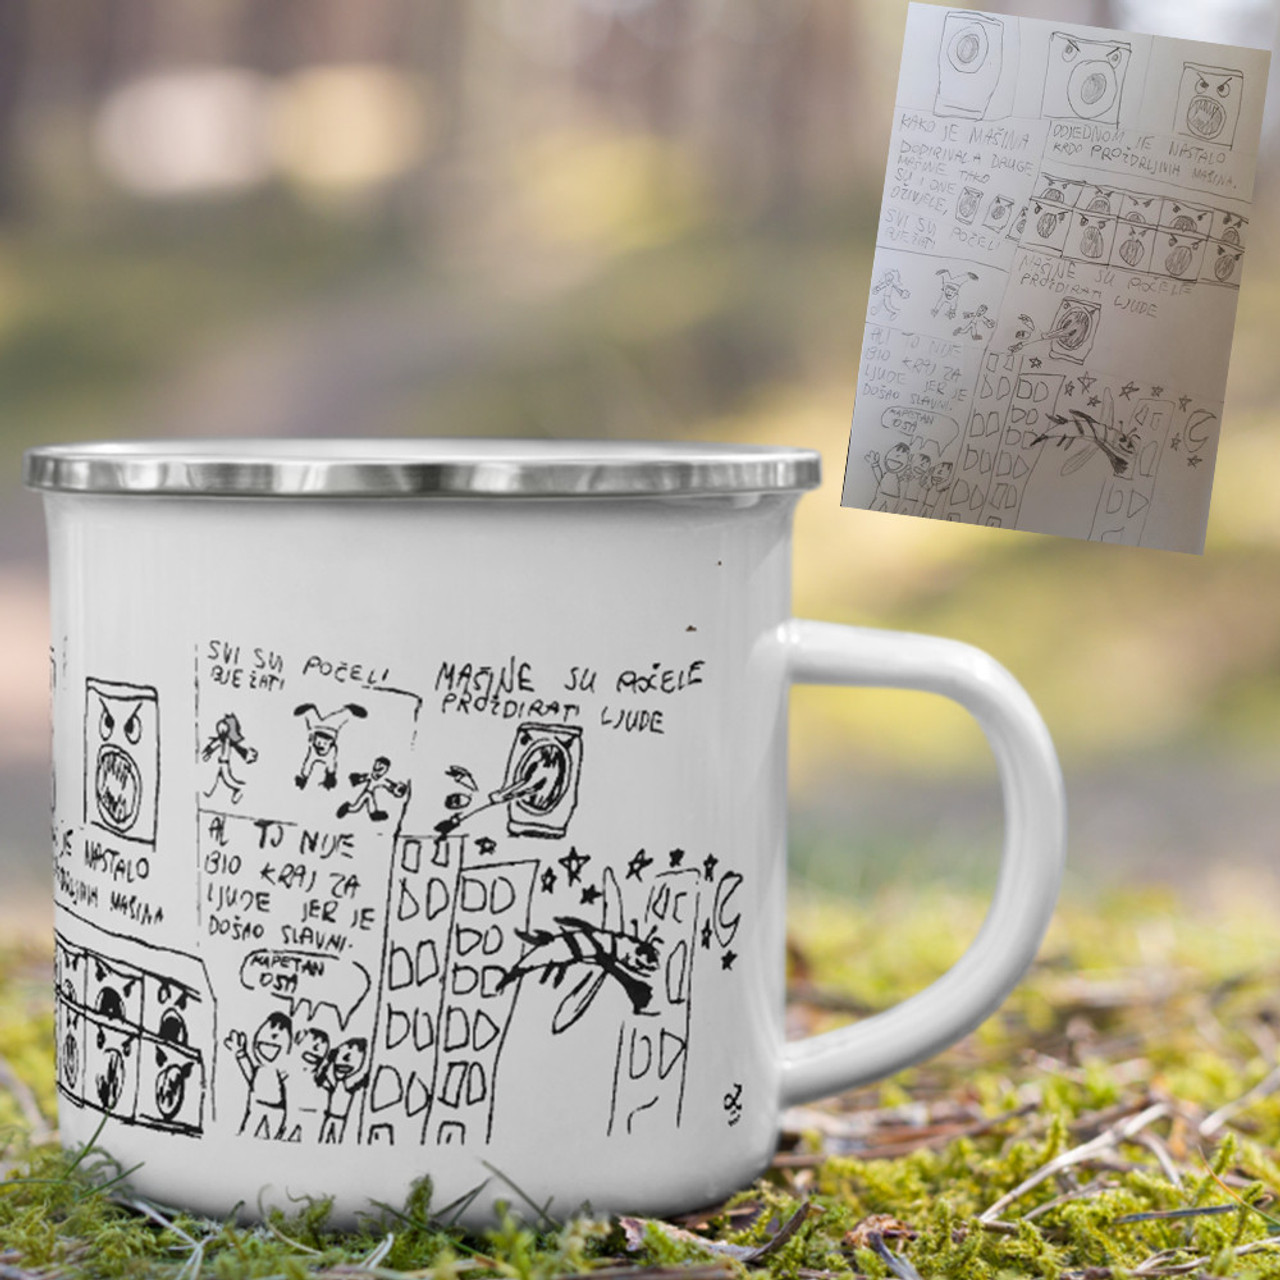 https://cdn11.bigcommerce.com/s-o16h1yivlu/images/stencil/1280x1280/products/180/692/Personalized-mug-artwork__91823.1621714337.jpg?c=1